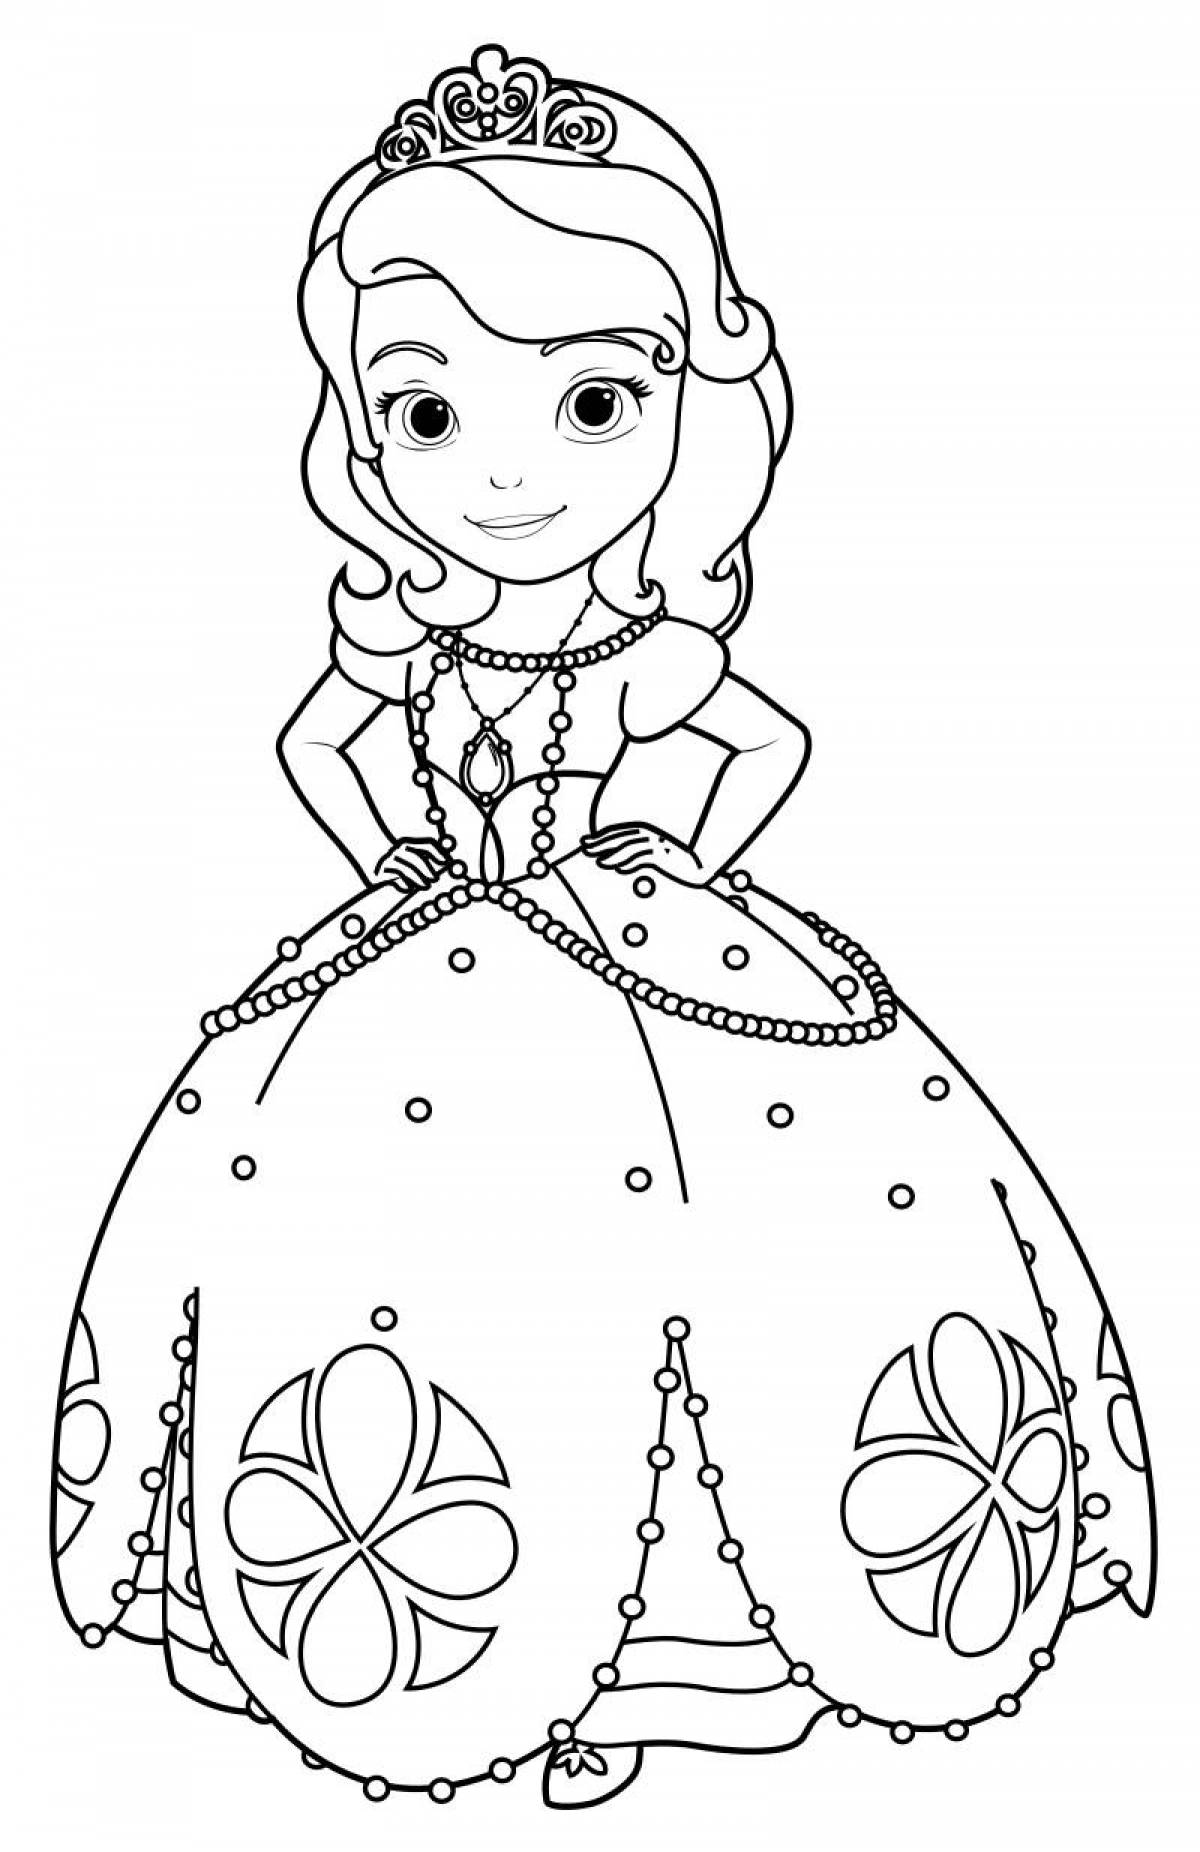 Adorable princess coloring pages for kids